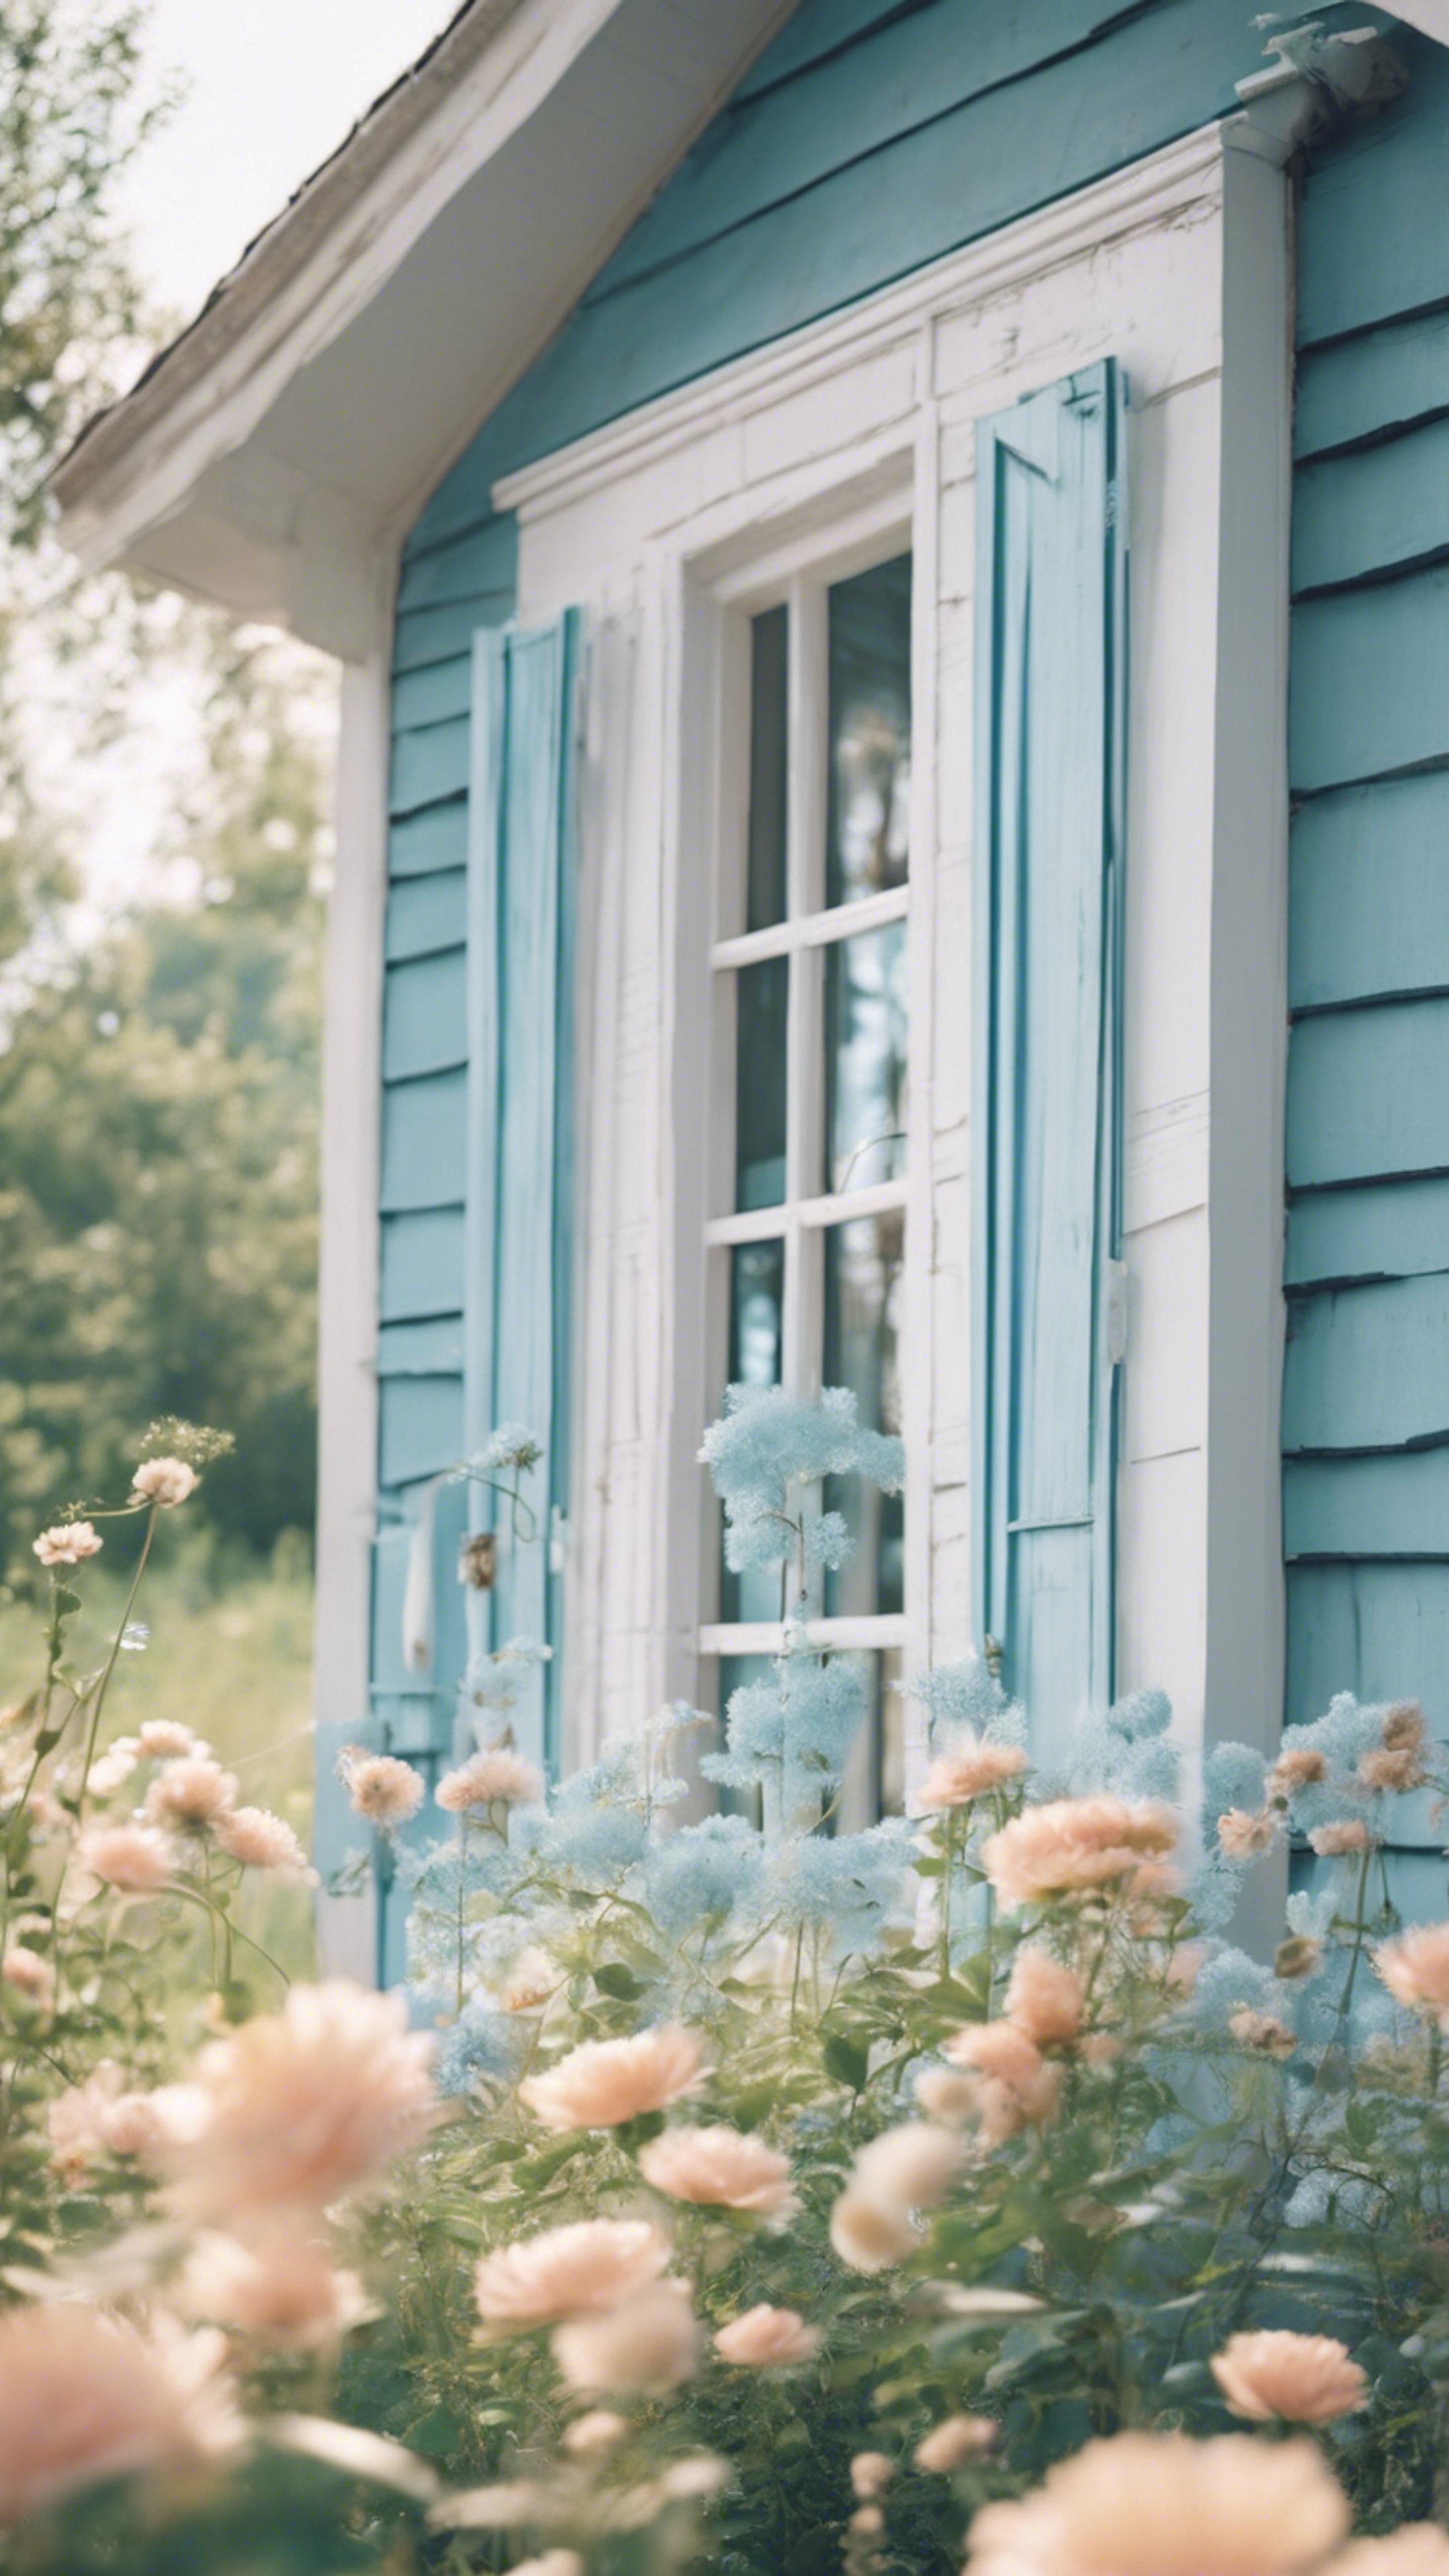 Preppy pastel blue summer farmhouse with white wooden windows. 墙纸[48dc49ad1a9b4a7c9166]